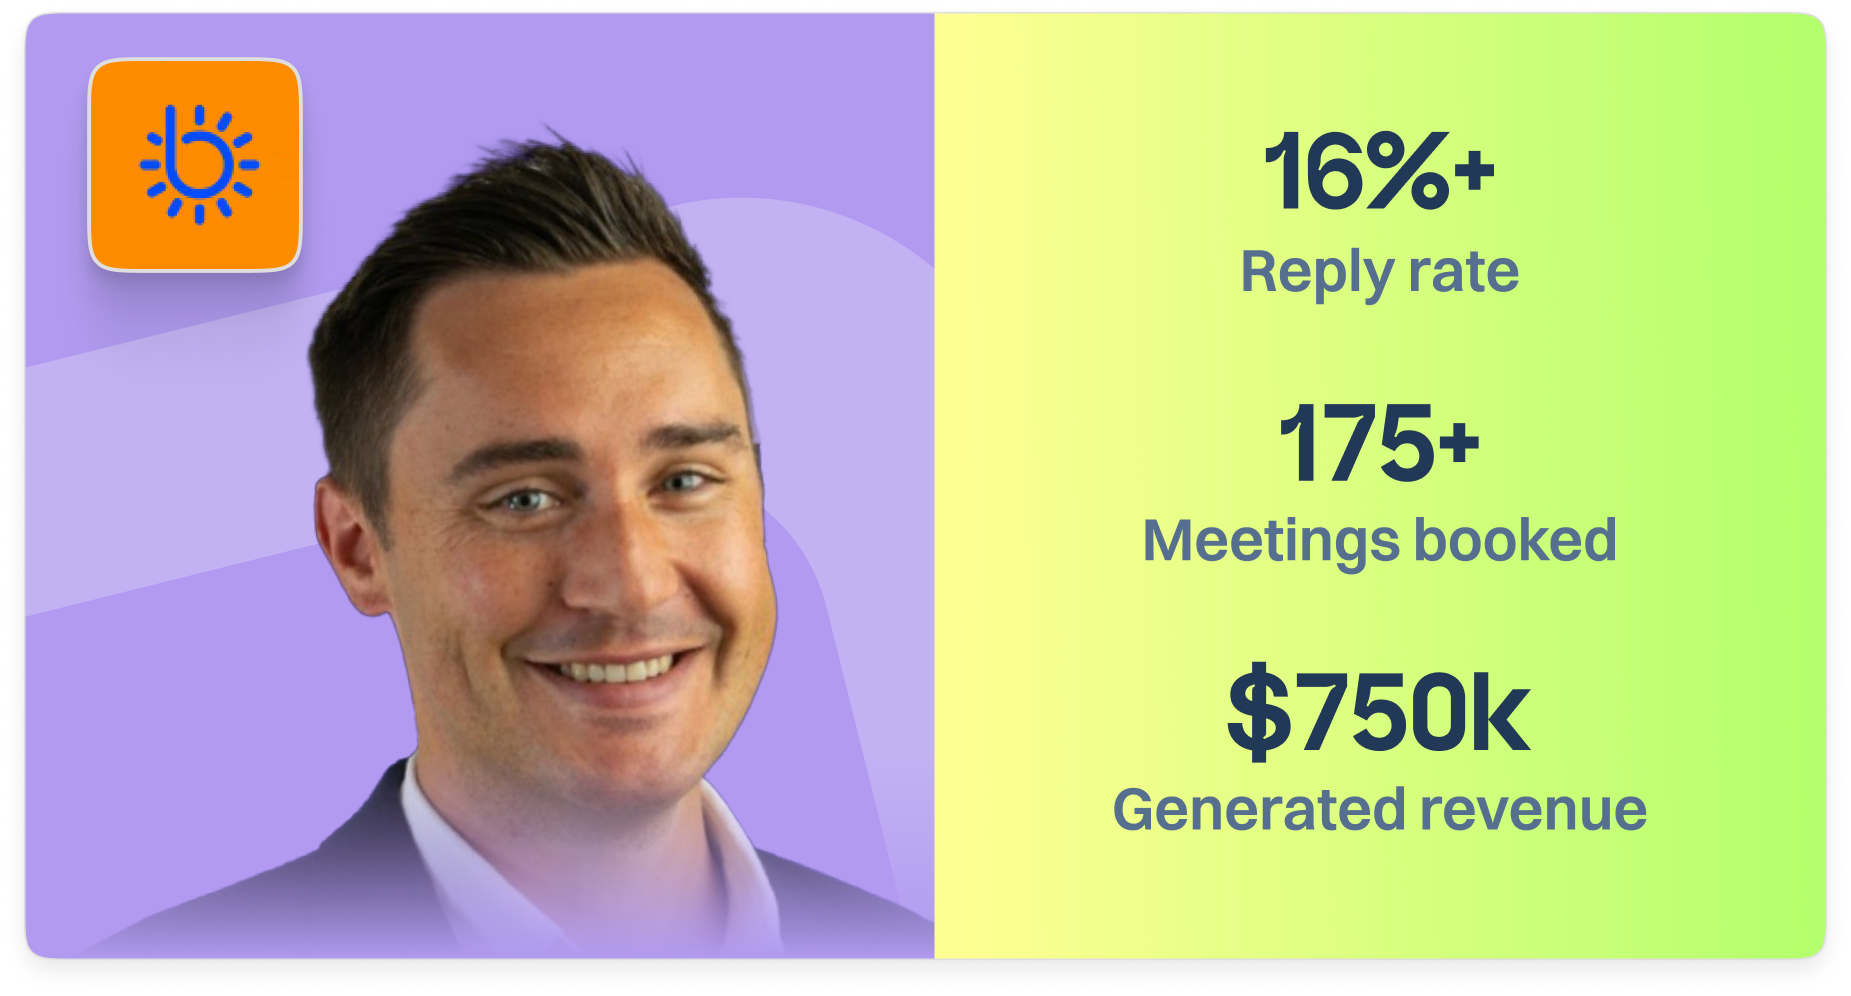 How myBrightside got 175+ meetings booked in 2 months with lemlist [Video]